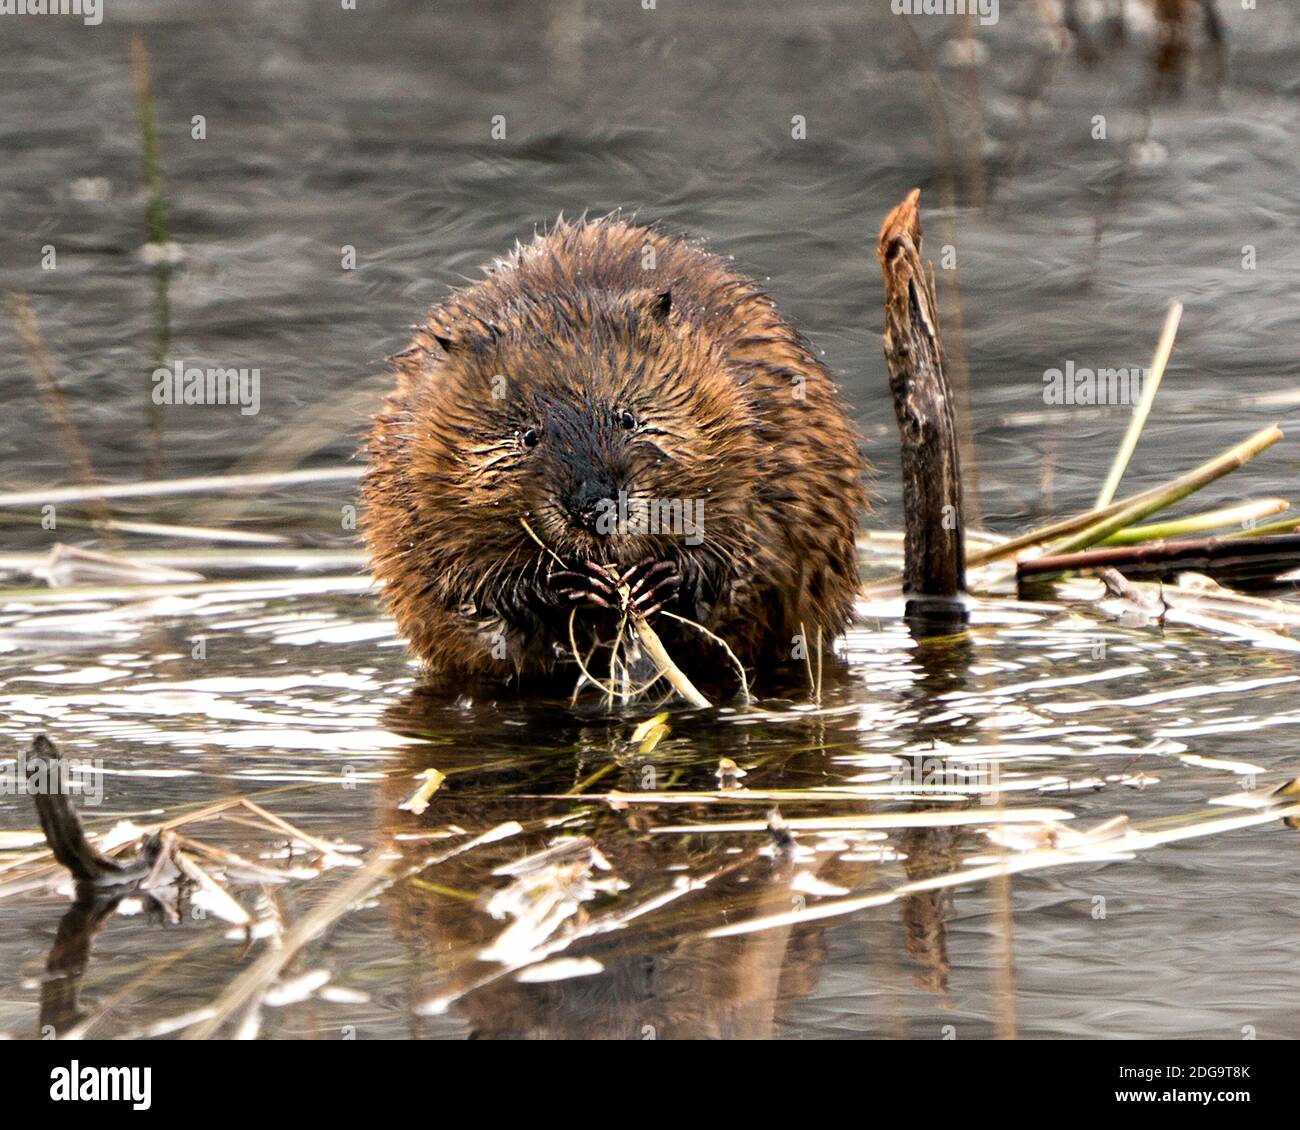 Muskrat in the water displaying its brown fur by a log with eating bark wood with a blur water background in its environment and habitat. Image. Pictu Stock Photo